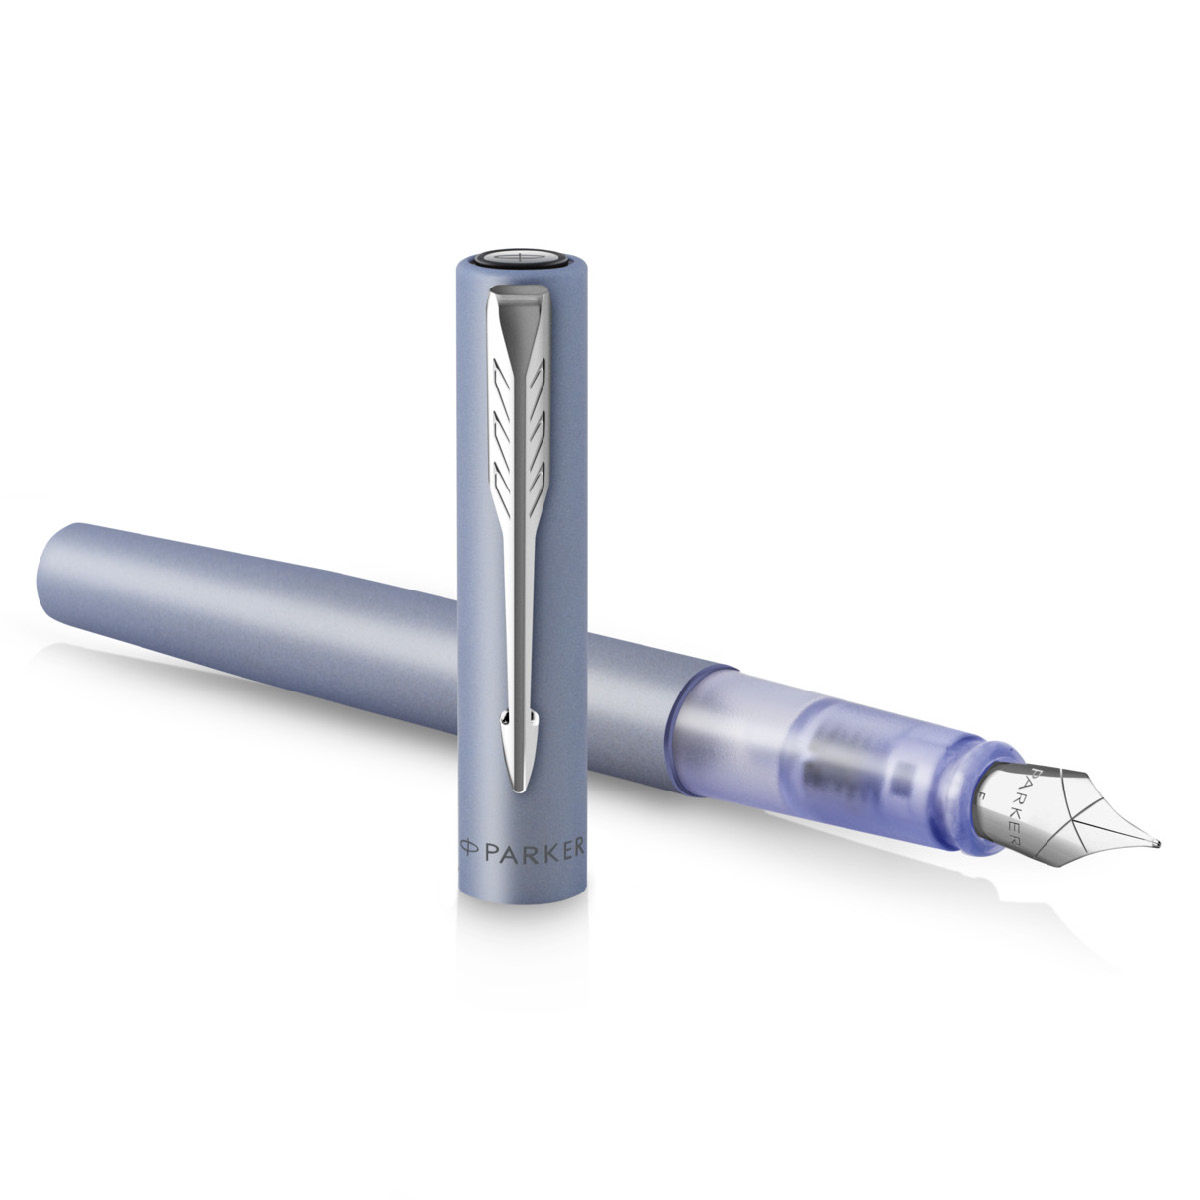 Vector XL Silver-Blue Fountain pen in the group Pens / Fine Writing / Fountain Pens at Pen Store (112678_r)